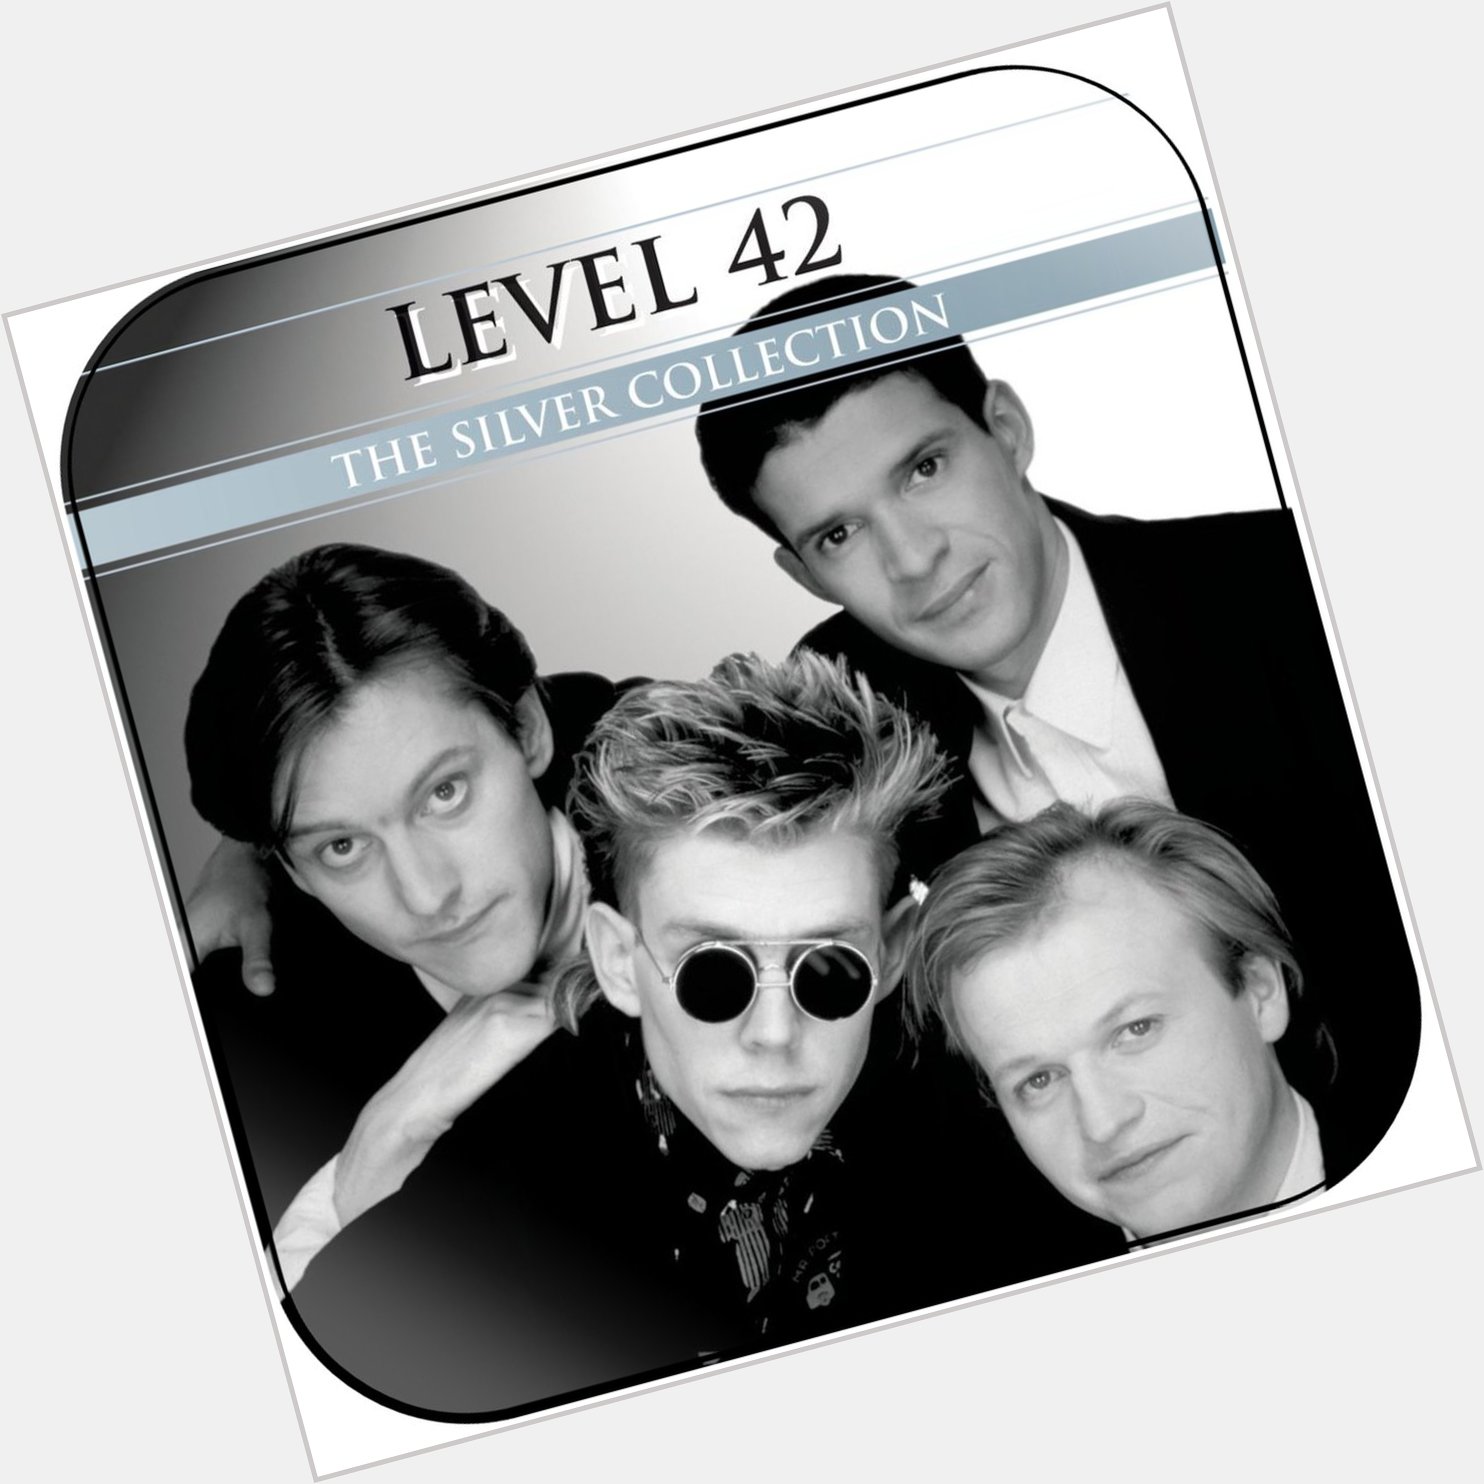 A happy 63rd birthday to Level 42 s Mark King! 